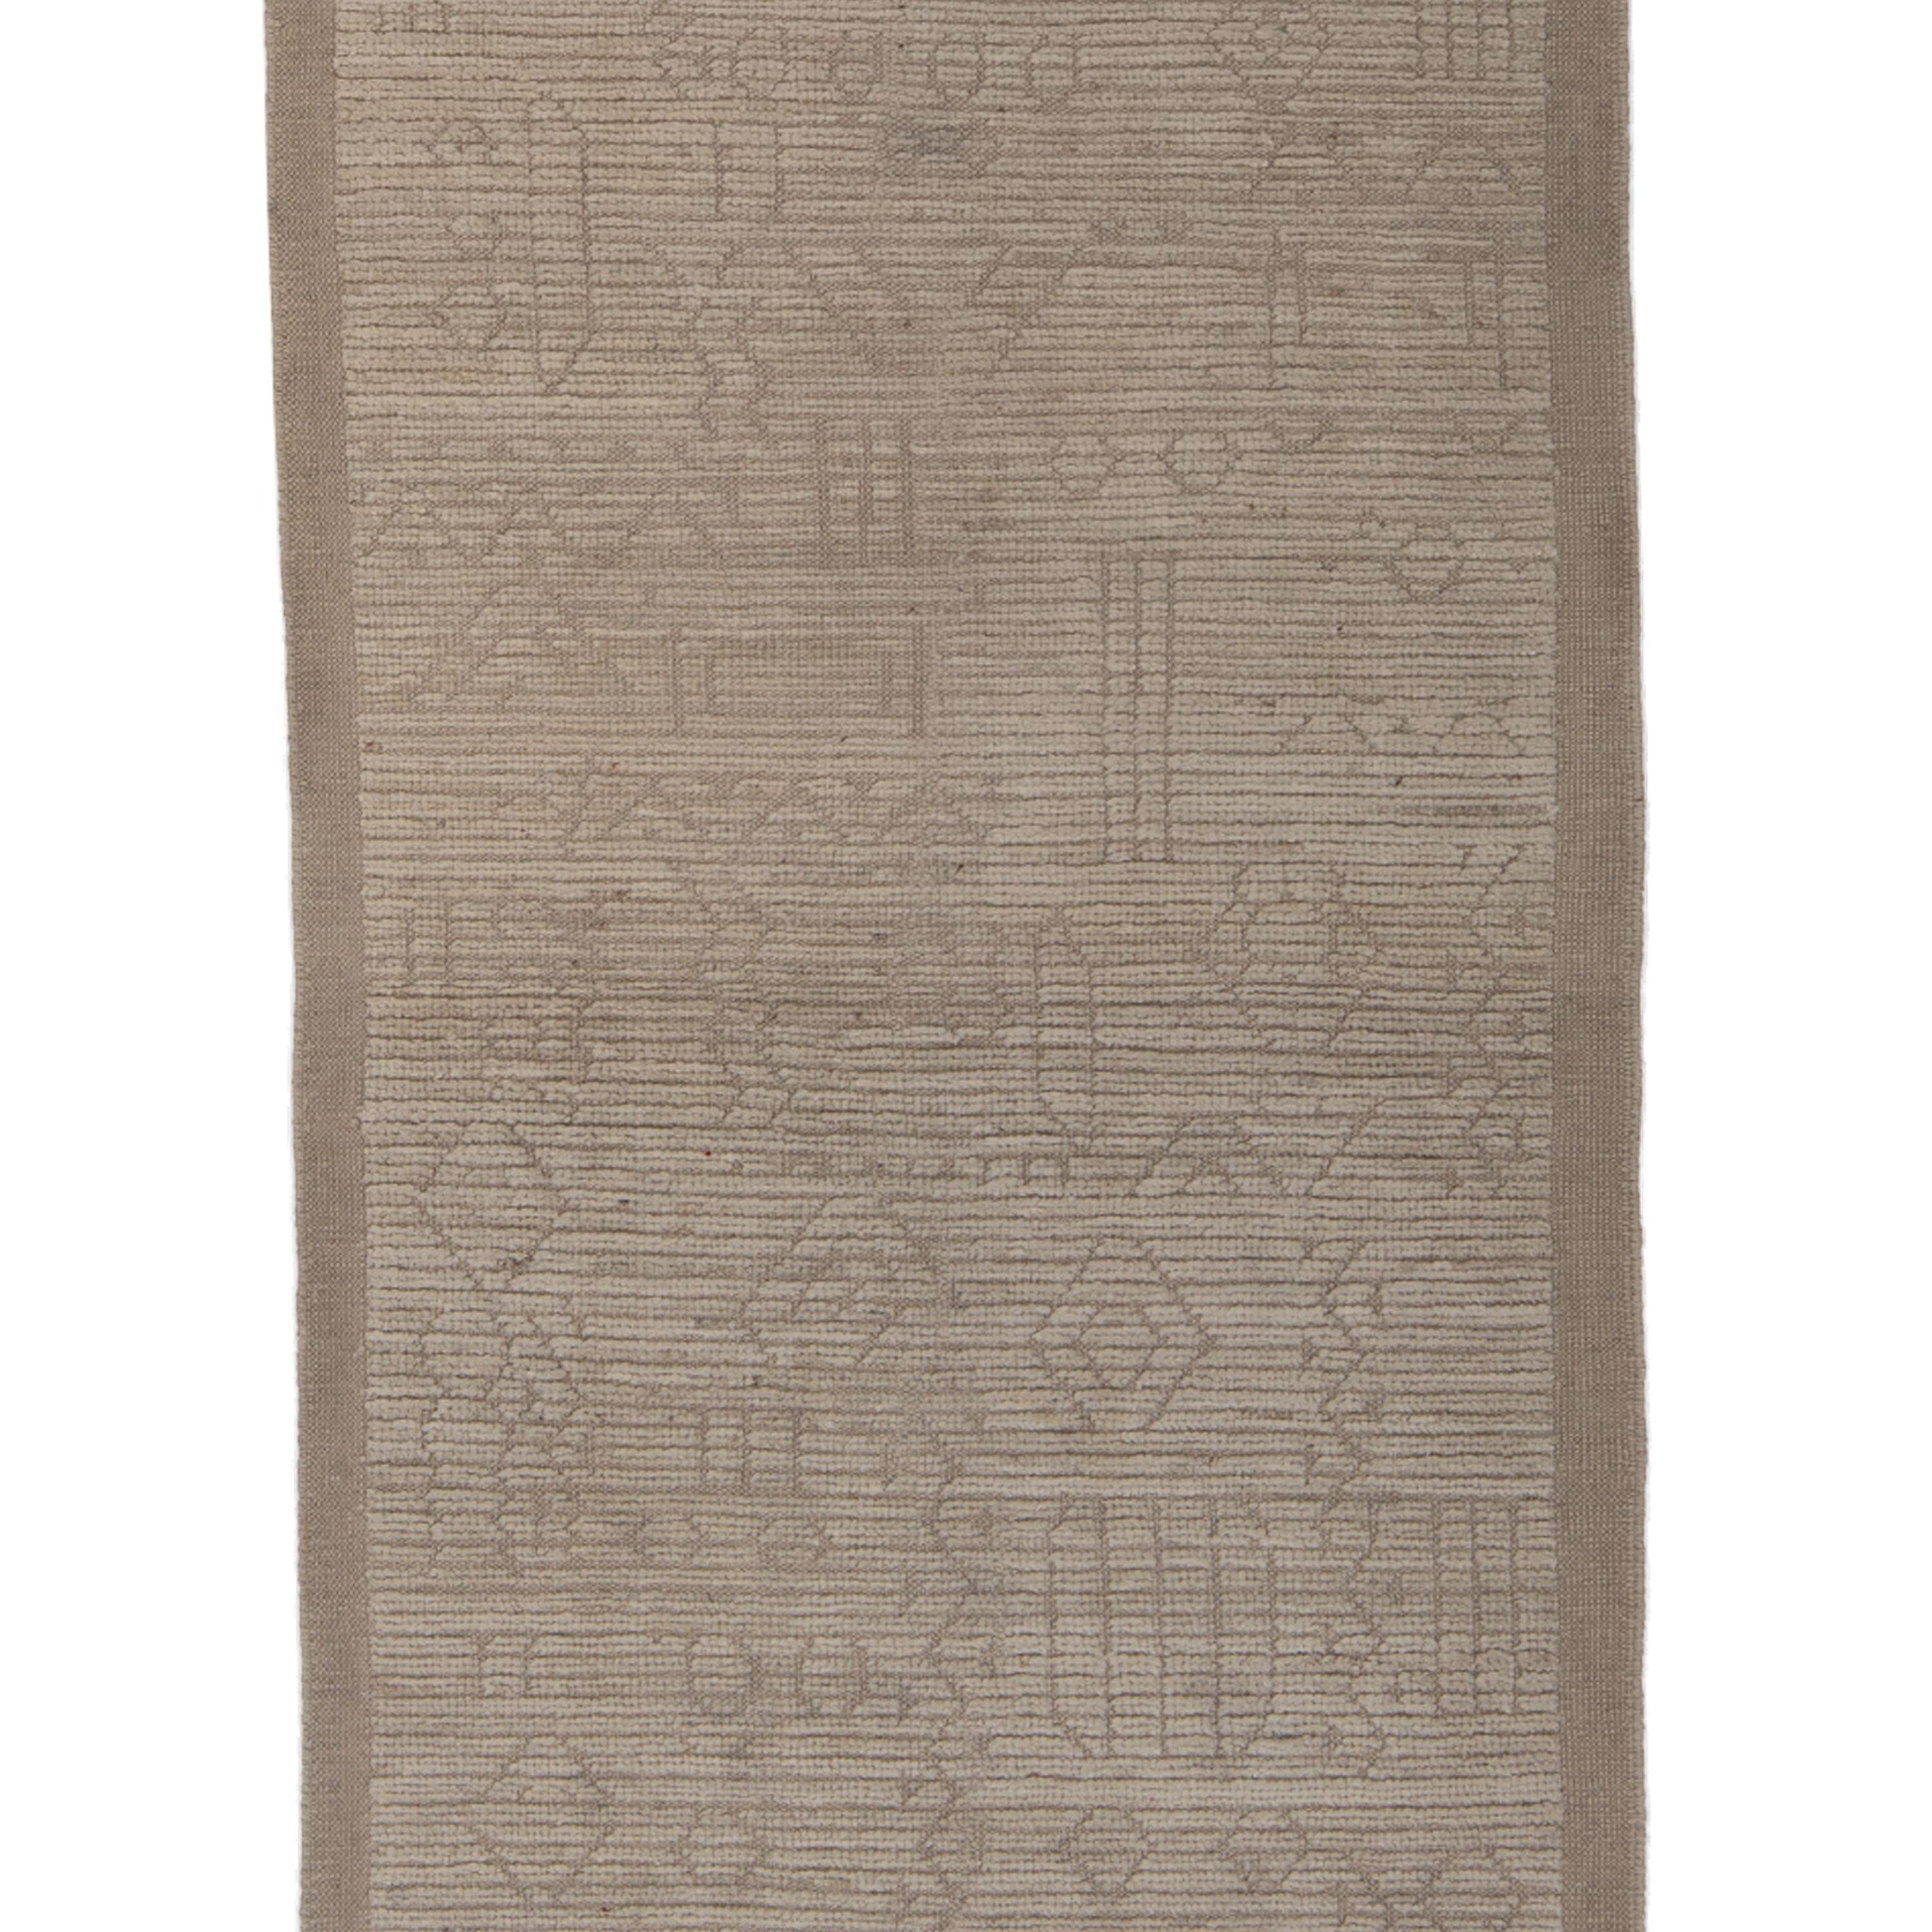 Hand-Knotted abc carpet Natural Zameen Transitional Wool Runner - 3' x 12'8